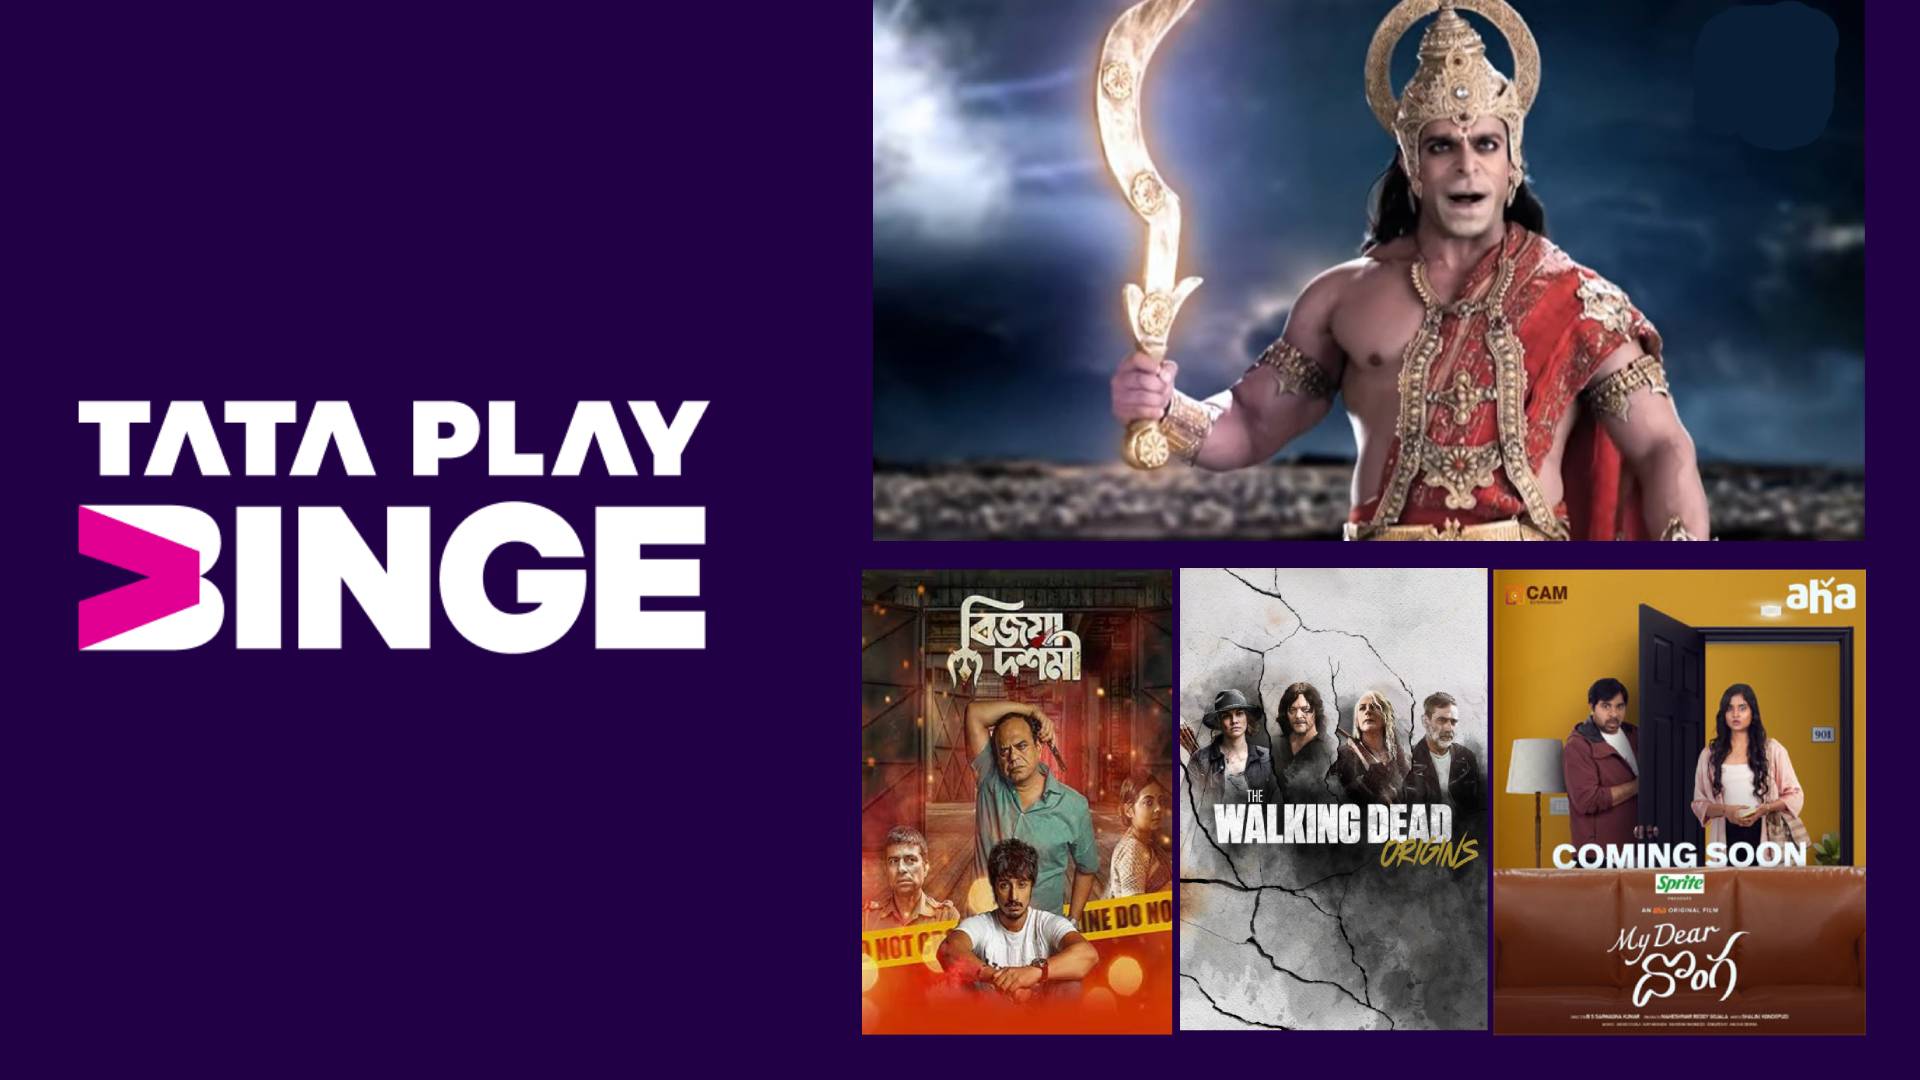 Regional movie releases took supremacy this April on OTT and Tata Play Binge has you covered with all of them under one roof!